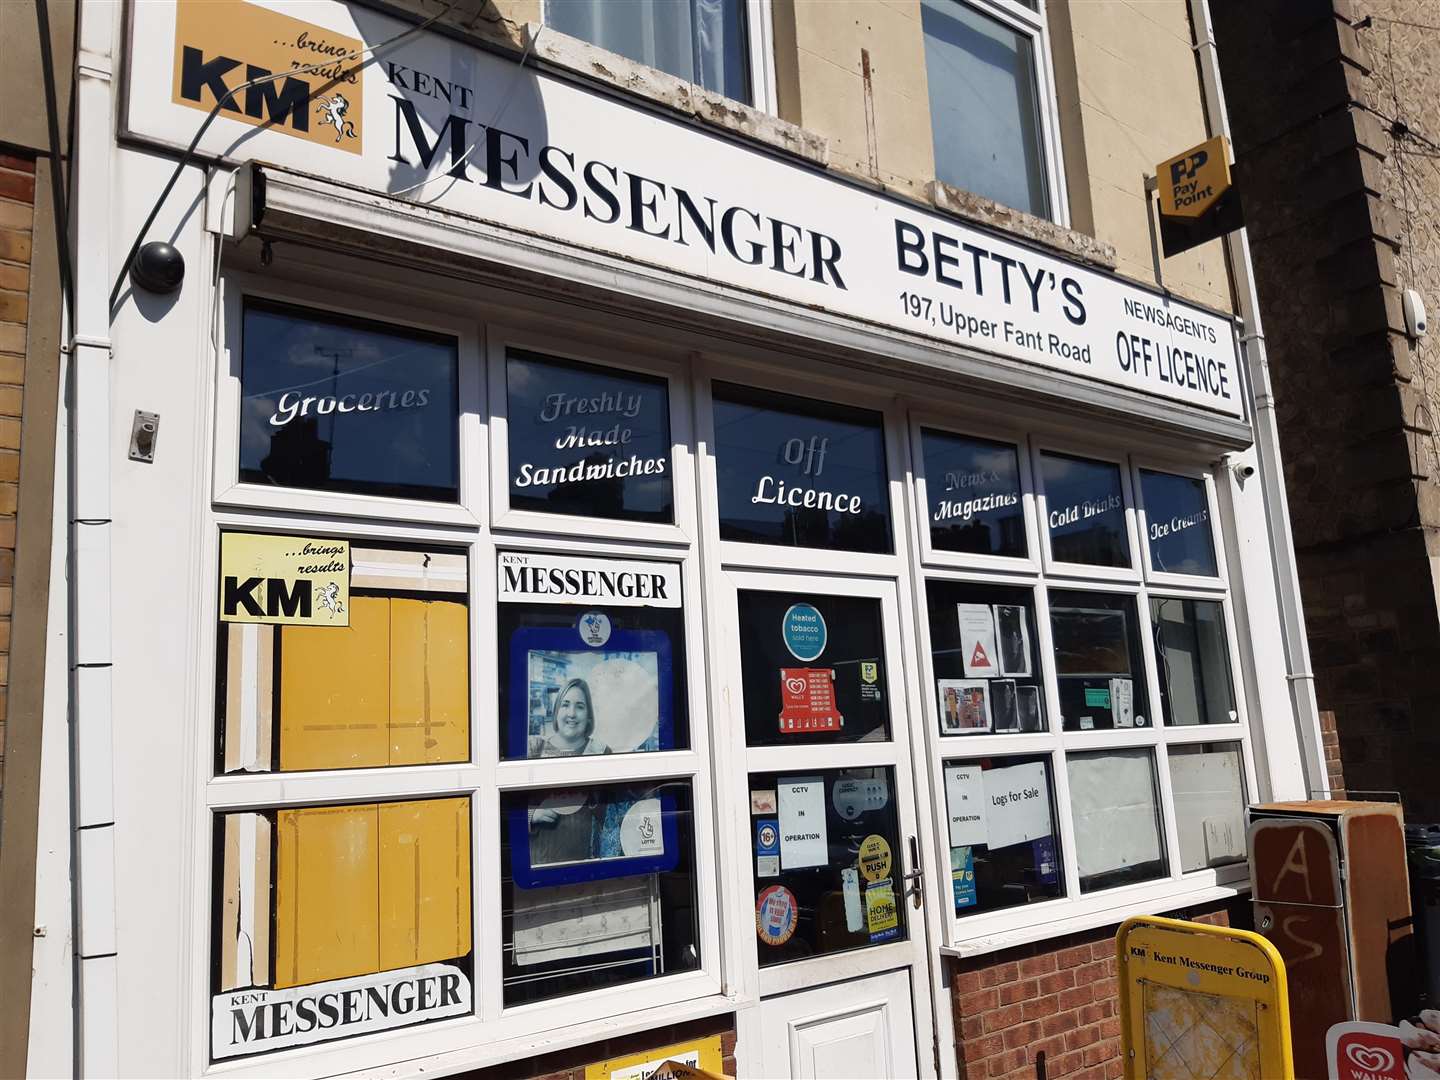 Betty's News in Upper Fant Road, Maidstone, is one of the few newsagents that still deliver